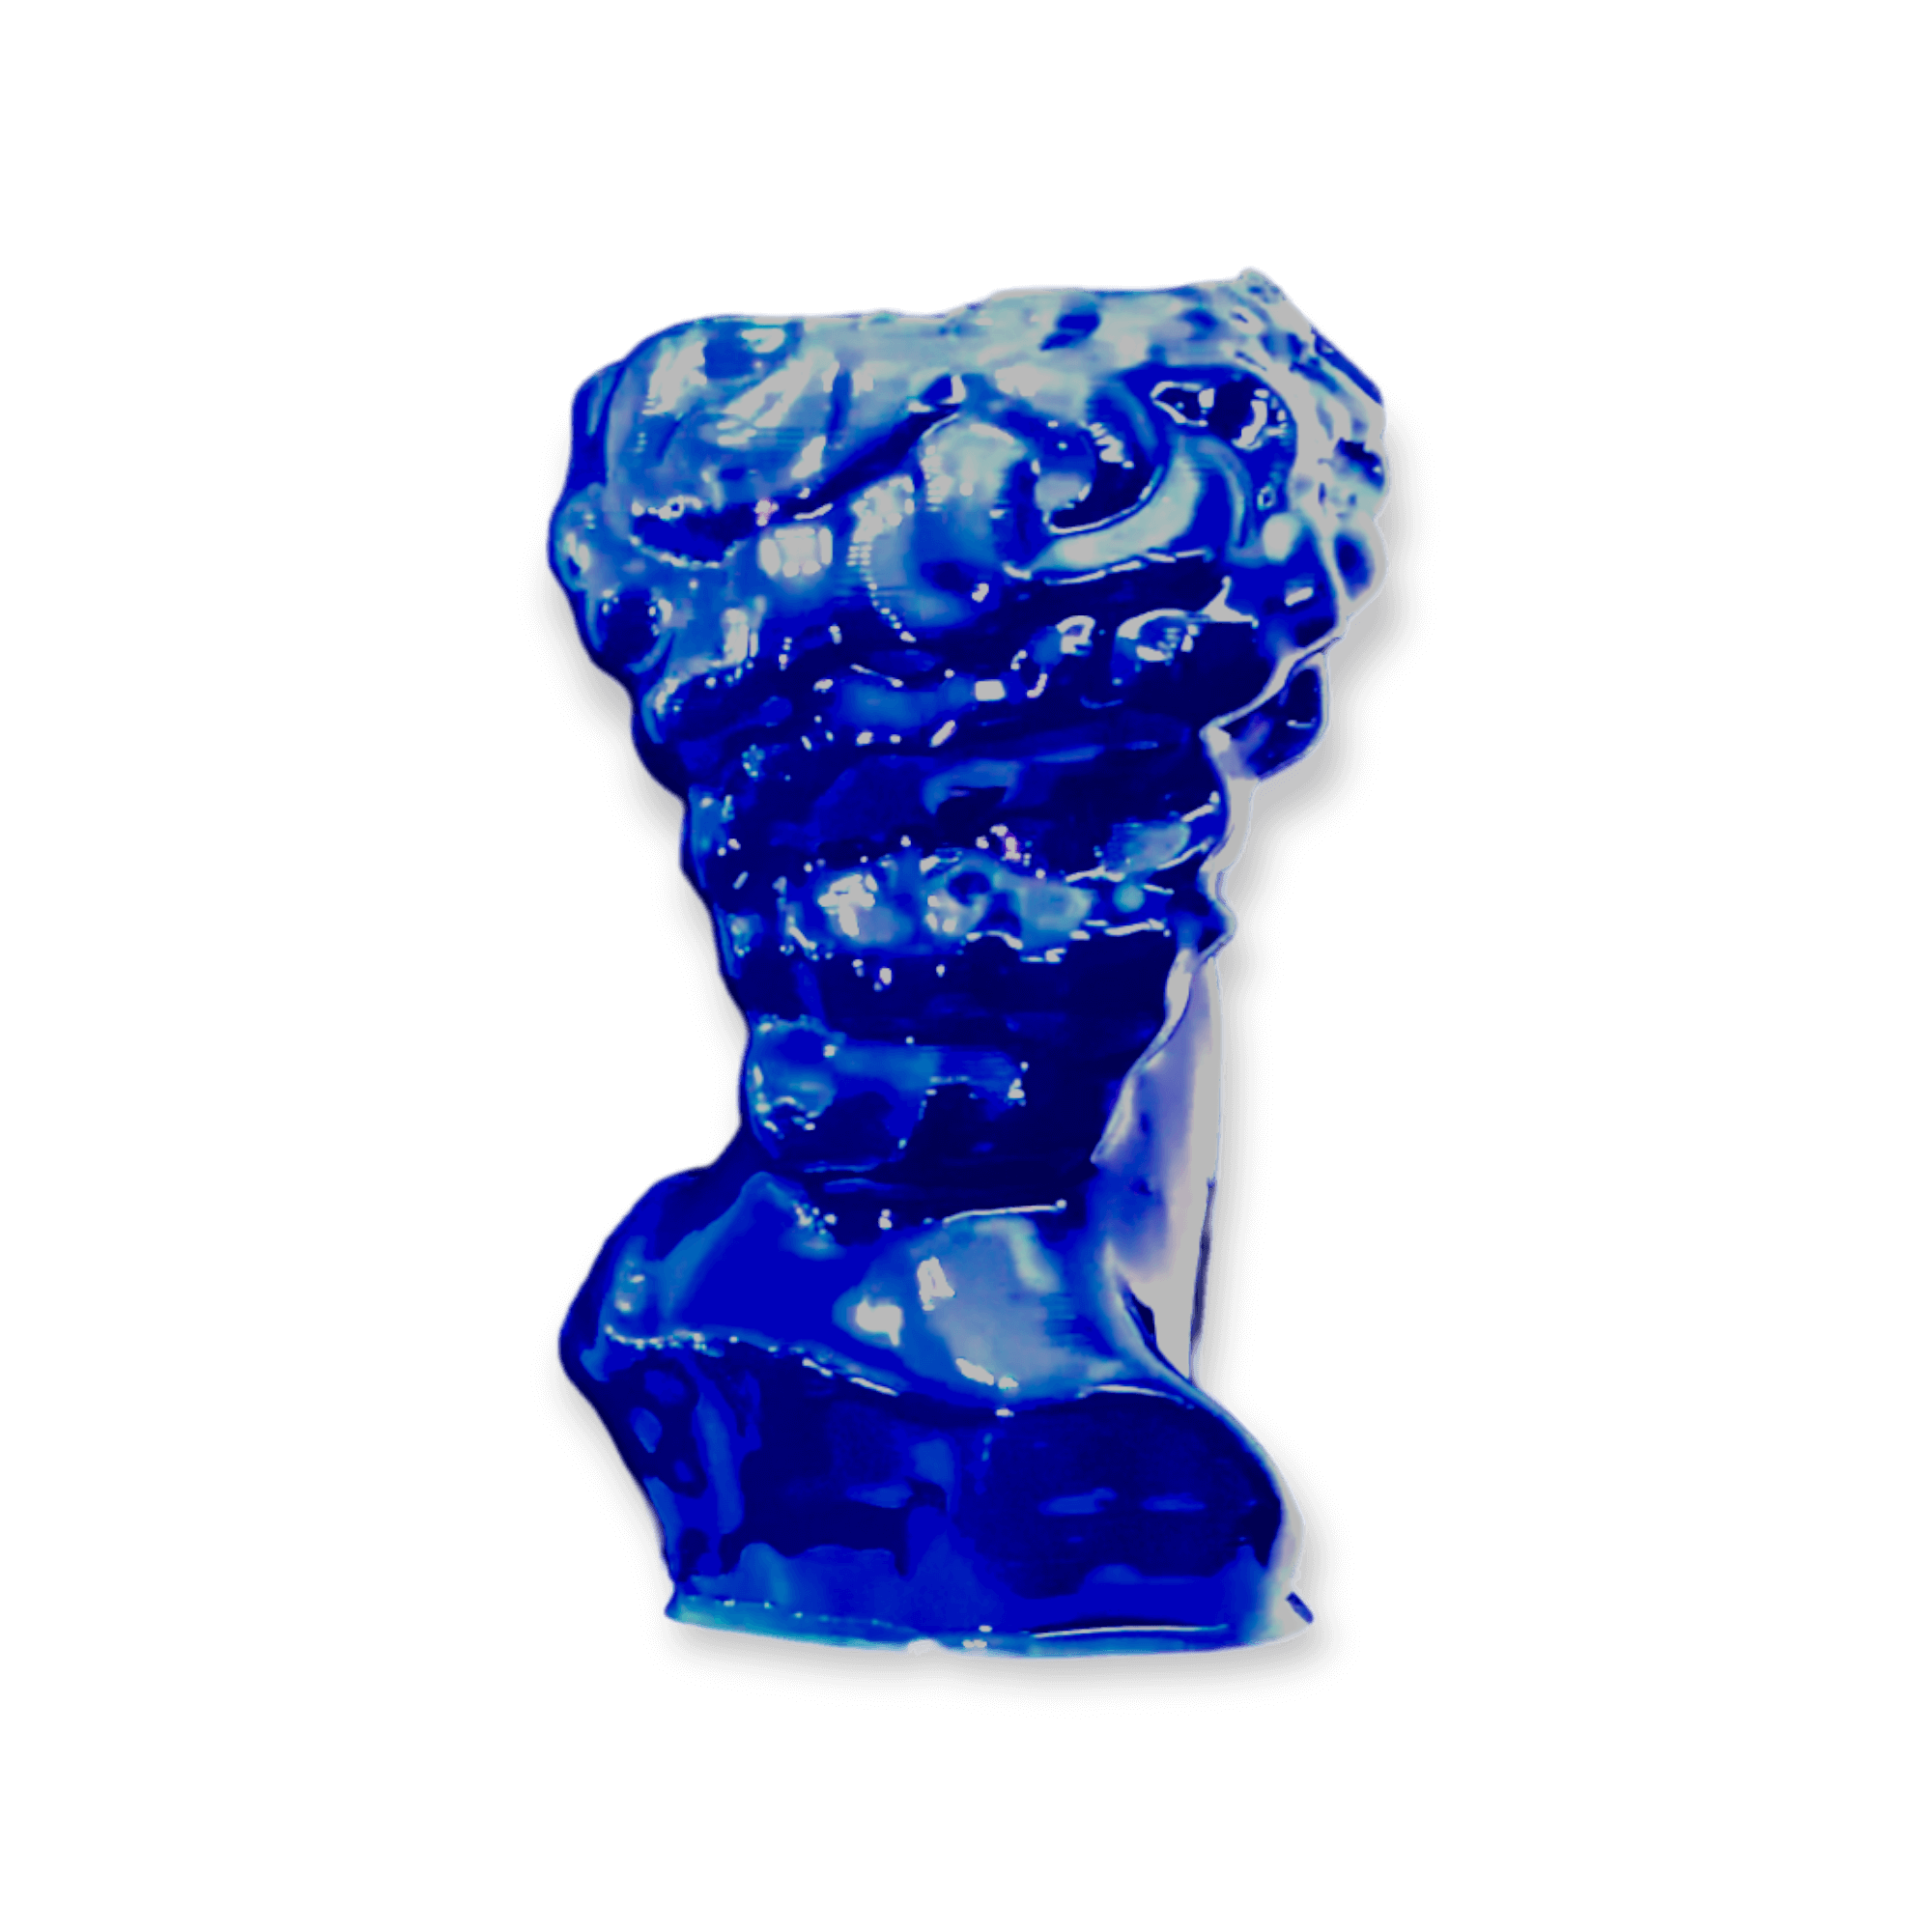 David mini 1 layer spiral and glazed 3d print 7.png.PNG